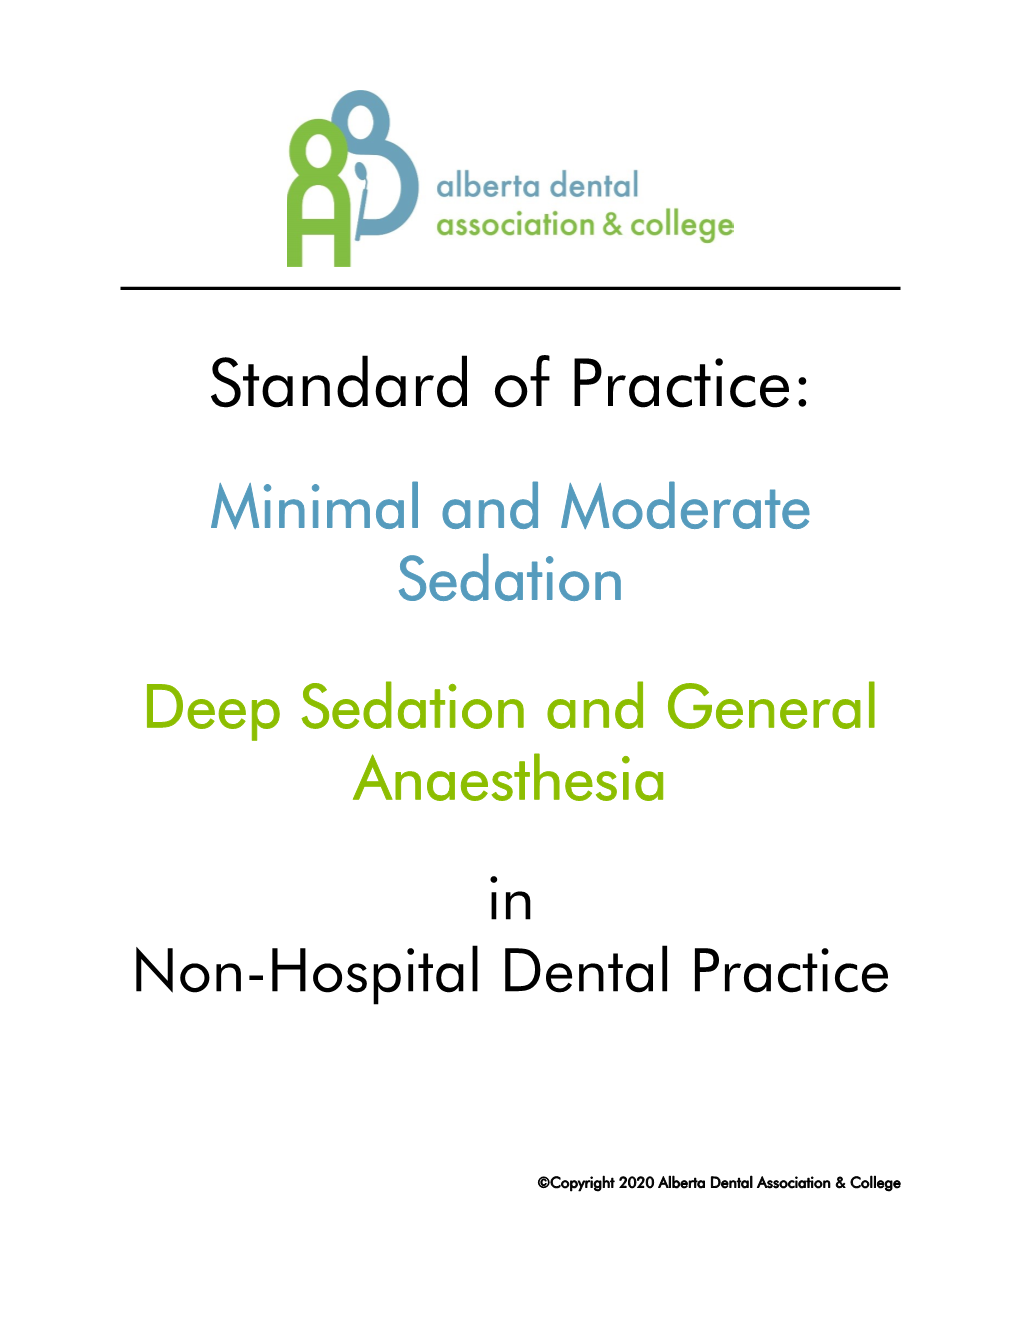 Standard of Practice: Minimal And